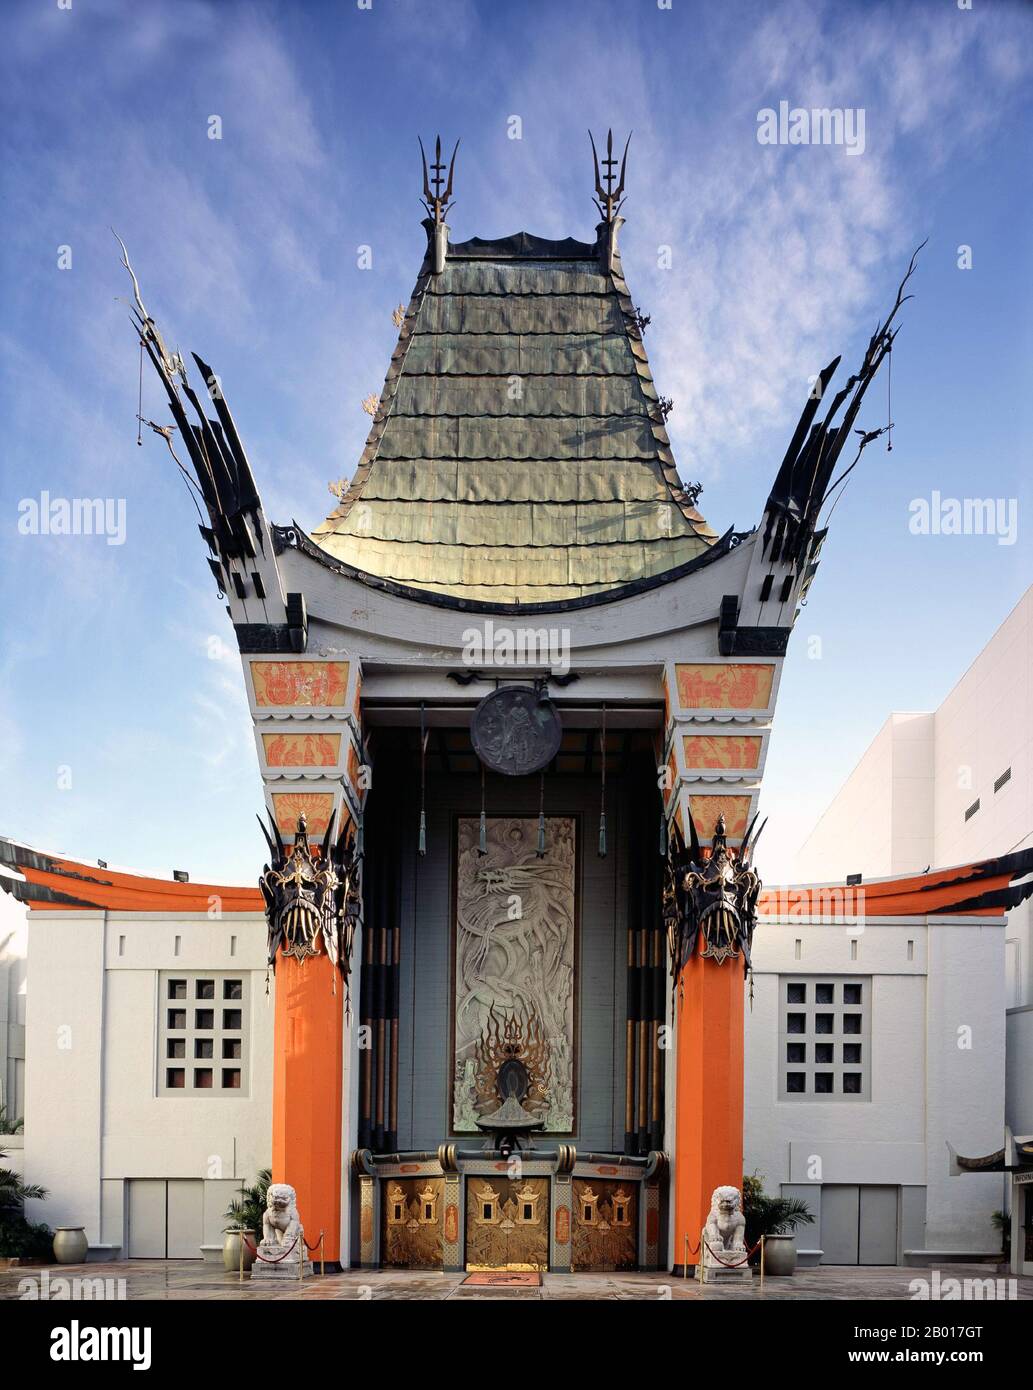 USA: Grauman's Chinese Theatre, Hollywood, California (opened 1927). Photo by Carl M. Highsmith (18 May 1946-), 7 April 2005 (Public Domain).  Grauman's Chinese Theatre is a movie theatre located at 6925 Hollywood Boulevard in Hollywood. It is located along the historic Hollywood Walk of Fame. The Chinese Theatre was commissioned following the success of the nearby Grauman's Egyptian Theatre which opened in 1922. Built over 18 months, beginning in January 1926 by a partnership headed by Sid Grauman, the theater opened May 18, 1927. Stock Photo